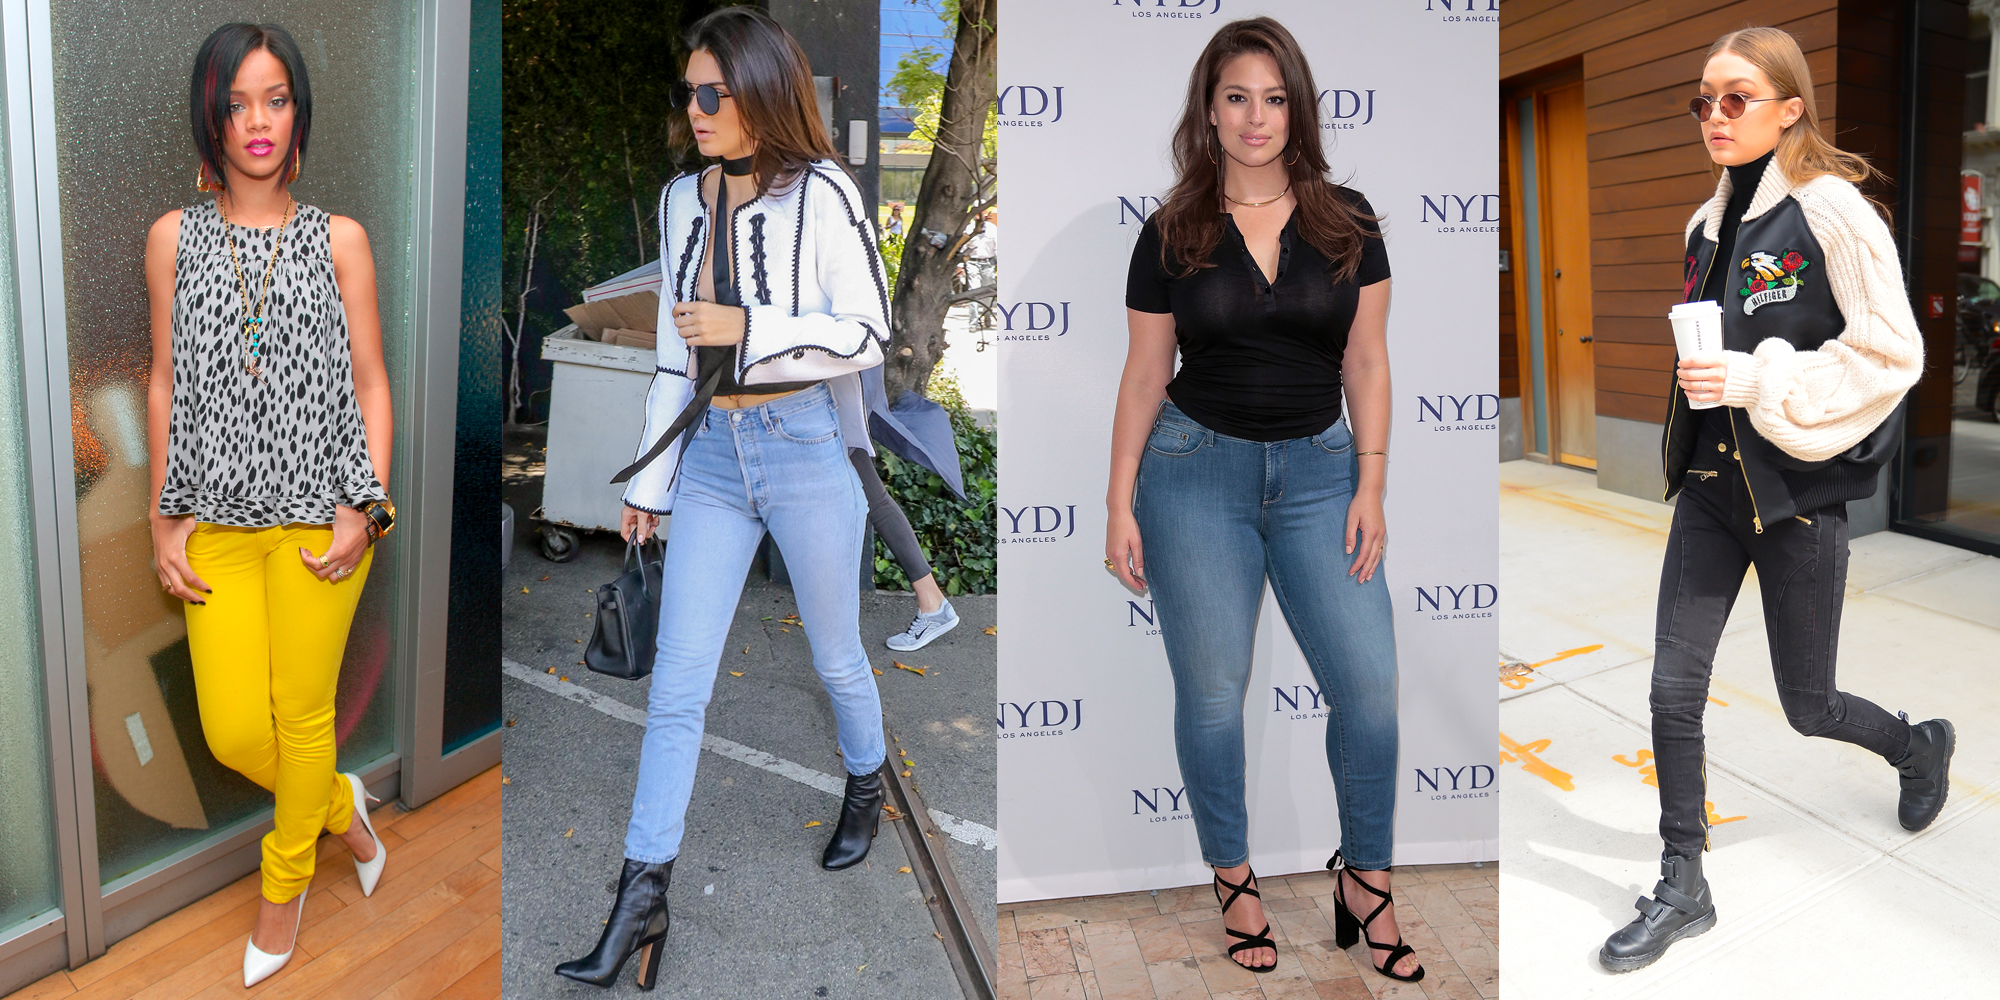 Are skinny jeans going out of style 2021?